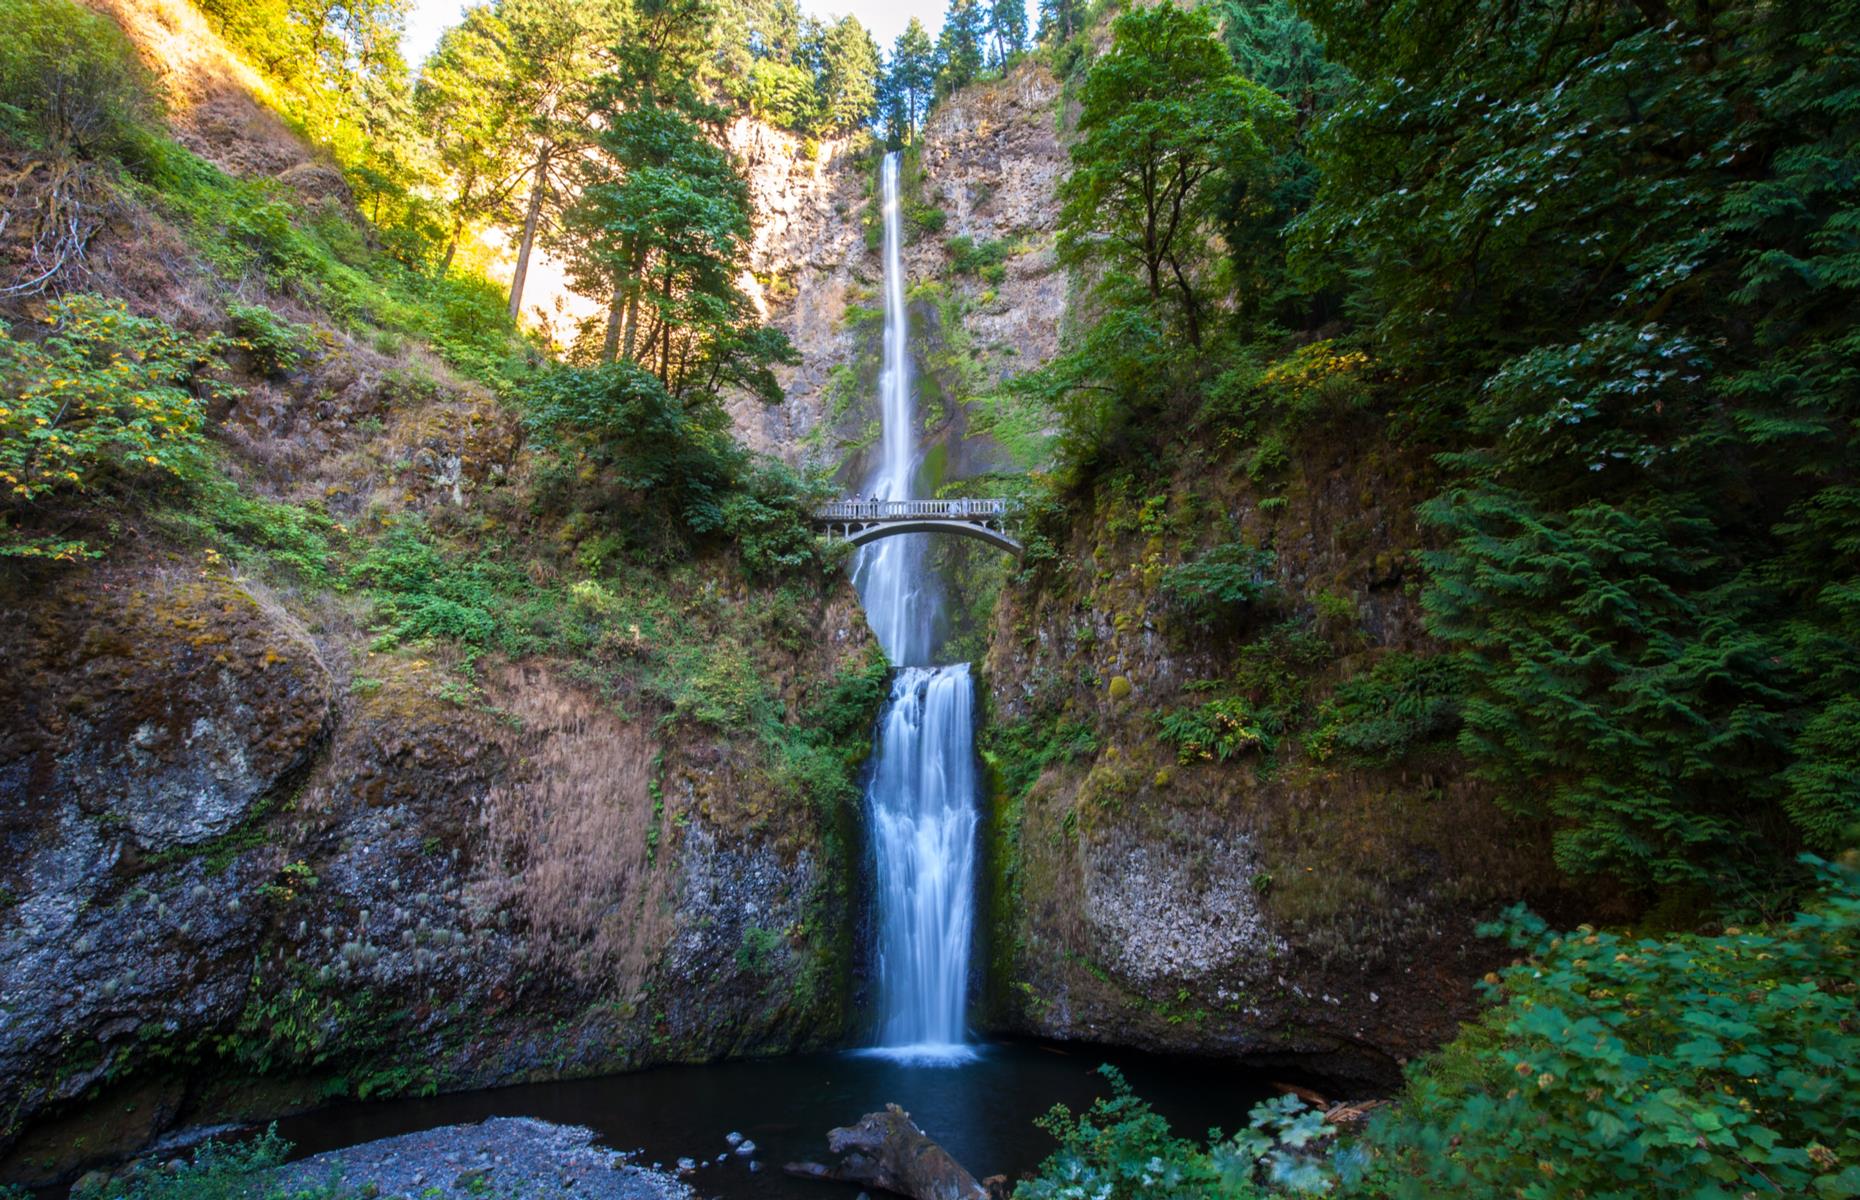 <p>The most majestic waterfalls are usually reached via long hikes or long treks through forests. But this lofty beauty is right by the roadside. The upper portion of <a href="https://www.fs.usda.gov/recarea/crgnsa/recarea/?recid=30026">Multnomah Falls</a> can even be viewed from the Historic Columbia River Highway. The cascade crashes from 611 feet (186m), with a stone bridge – built in 1914 – spanning its width.</p>  <p><a href="https://www.loveexploring.com/galleries/96880/americas-most-beautiful-waterfalls"><strong>Discover more of America's most beautiful waterfalls</strong></a></p>